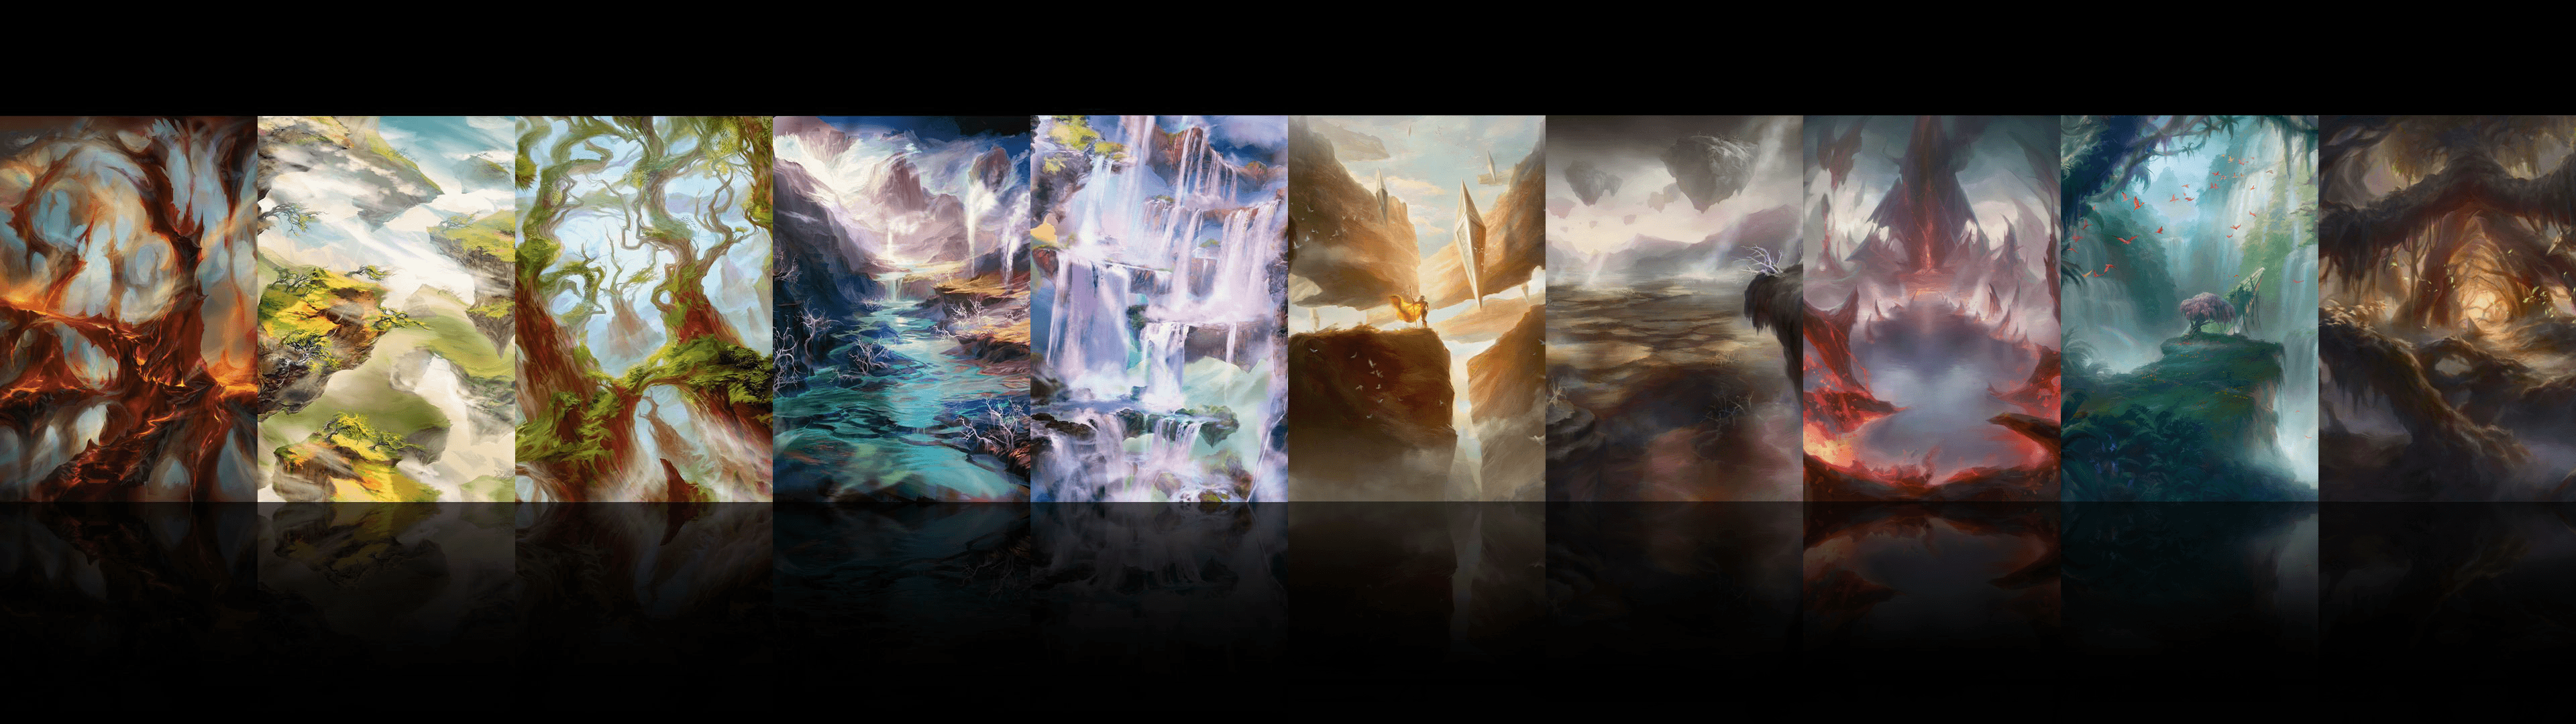 I gathered Battle For Zendikar Expeditions Wallpaper so you don't